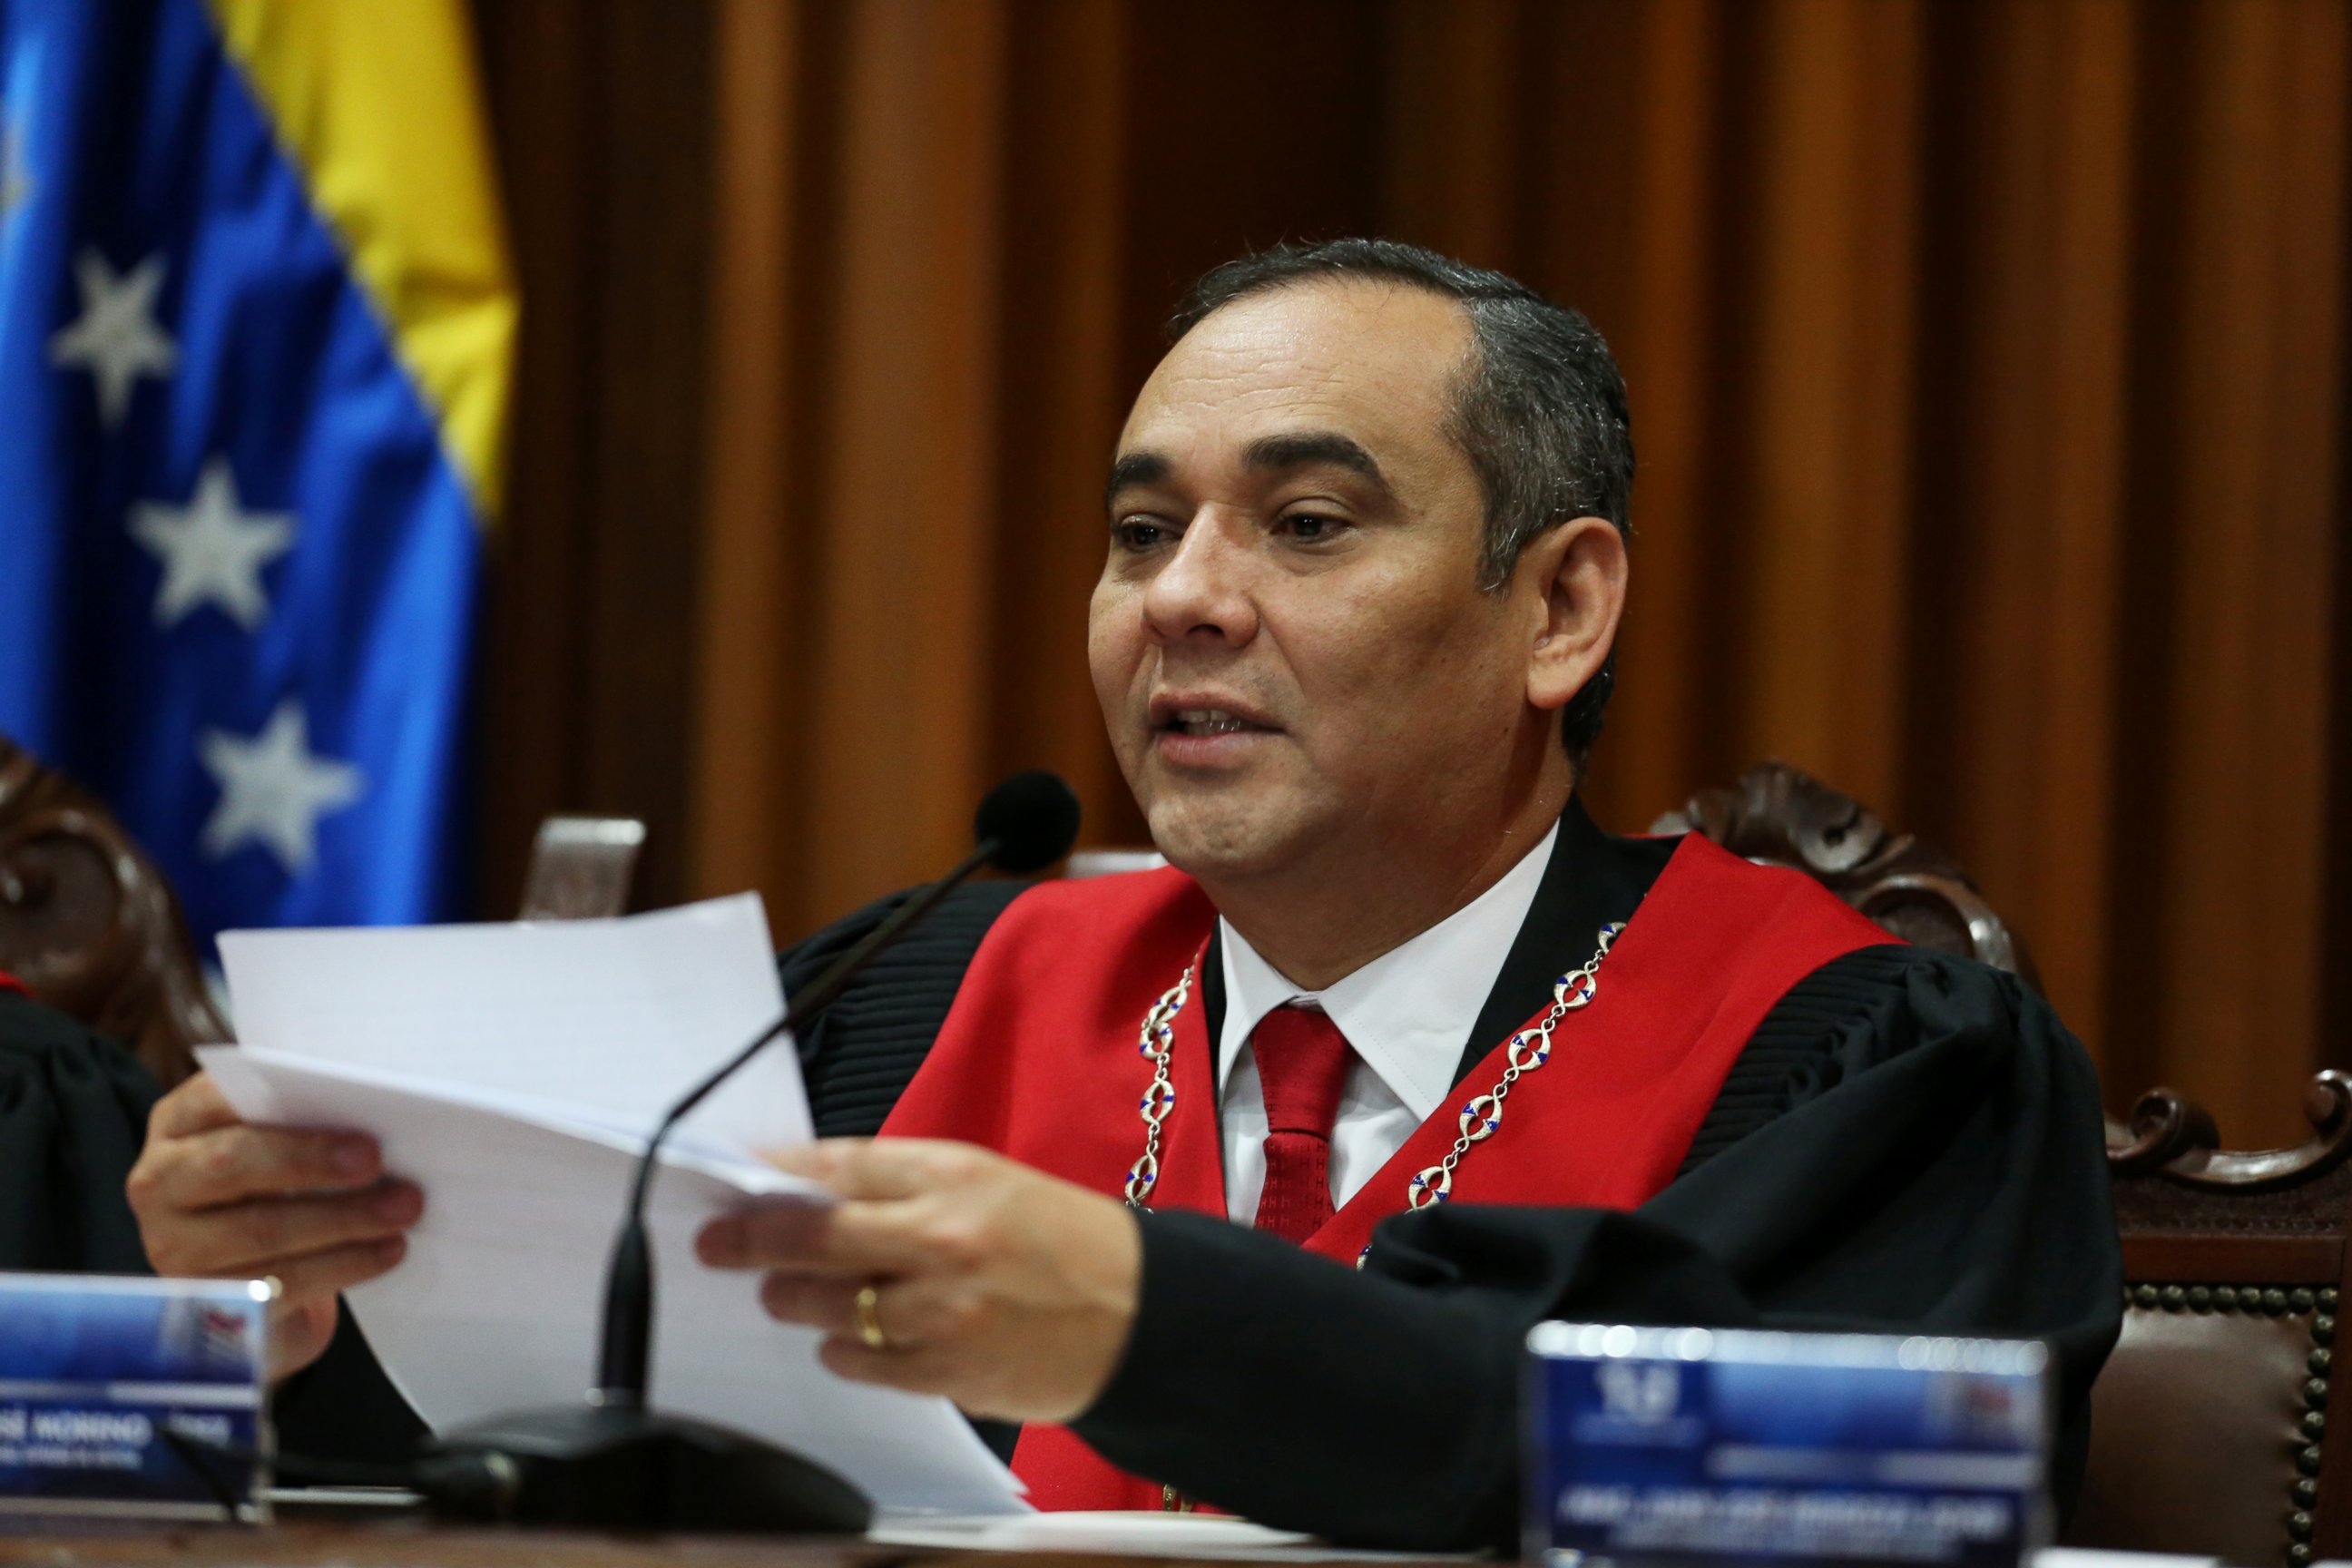 PHOTO: Venezuela's Supreme Court President Maikel Moreno, speaks during a news conference at the Supreme Court of Justice (TSJ) in Caracas, Venezuela April 1, 2017.